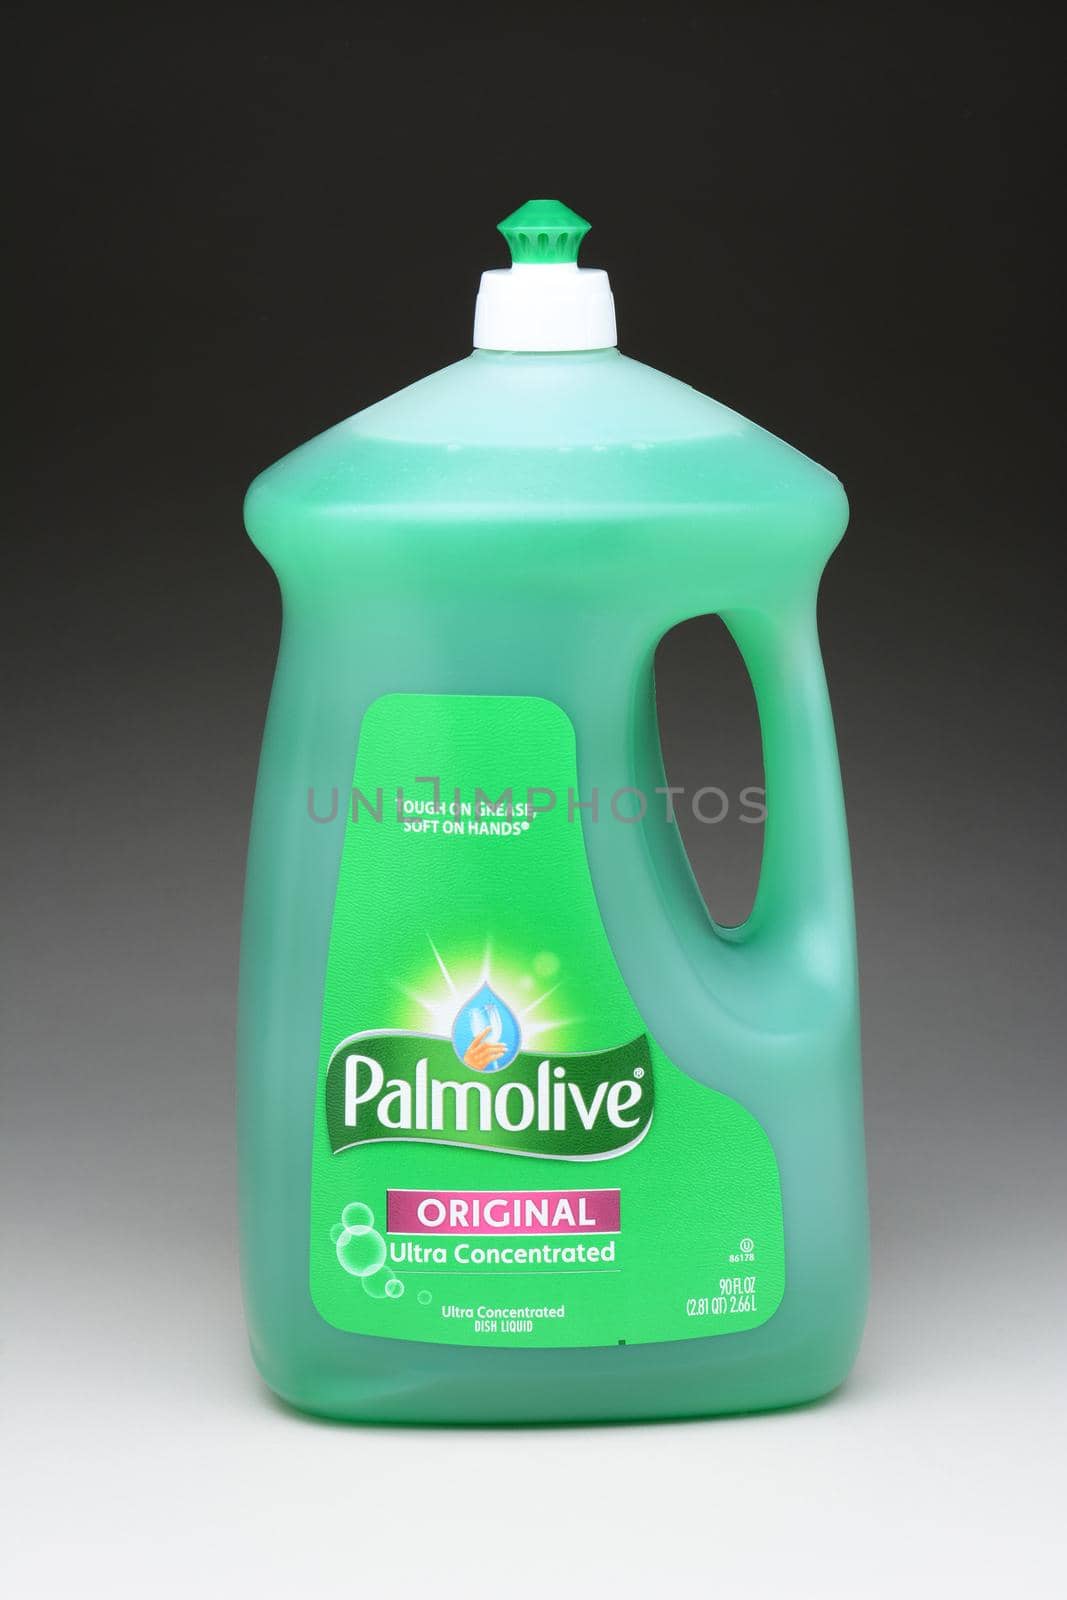 IRVINE, CA - January 21, 2013: A 90 ounce bottle of Palmolive Original Dish Liquid. The Colgate-Palmolive Company, with sales surpassing $15 billion is in over 200 countries.